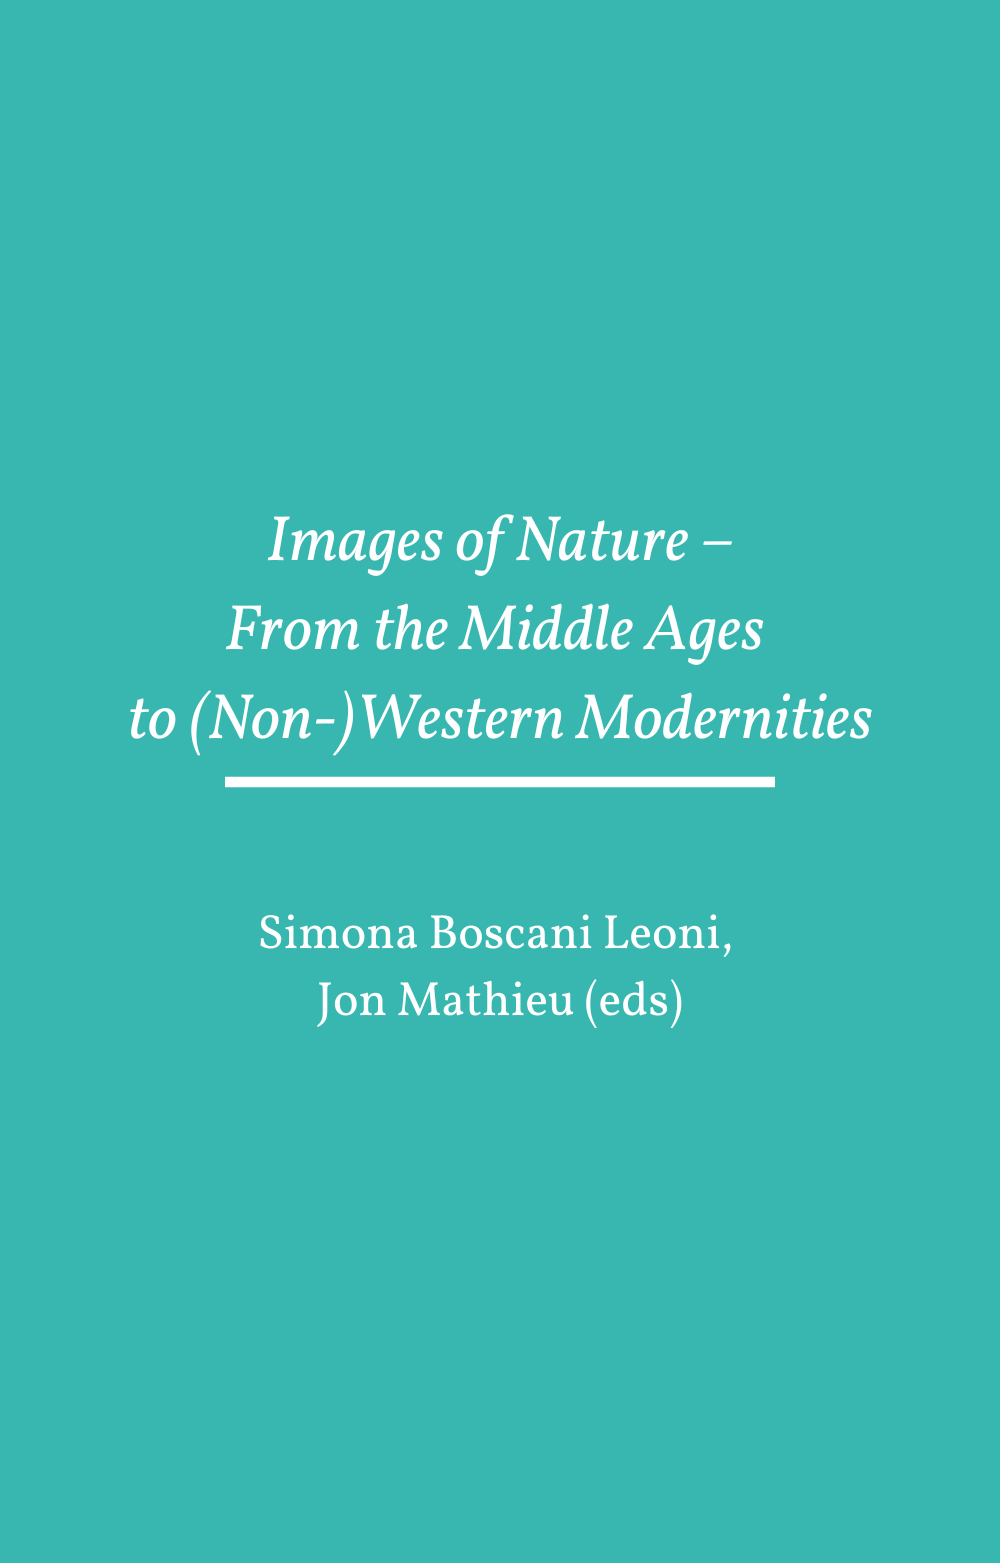 Images of Nature – From the Middle Ages to (Non-)Western Modernities